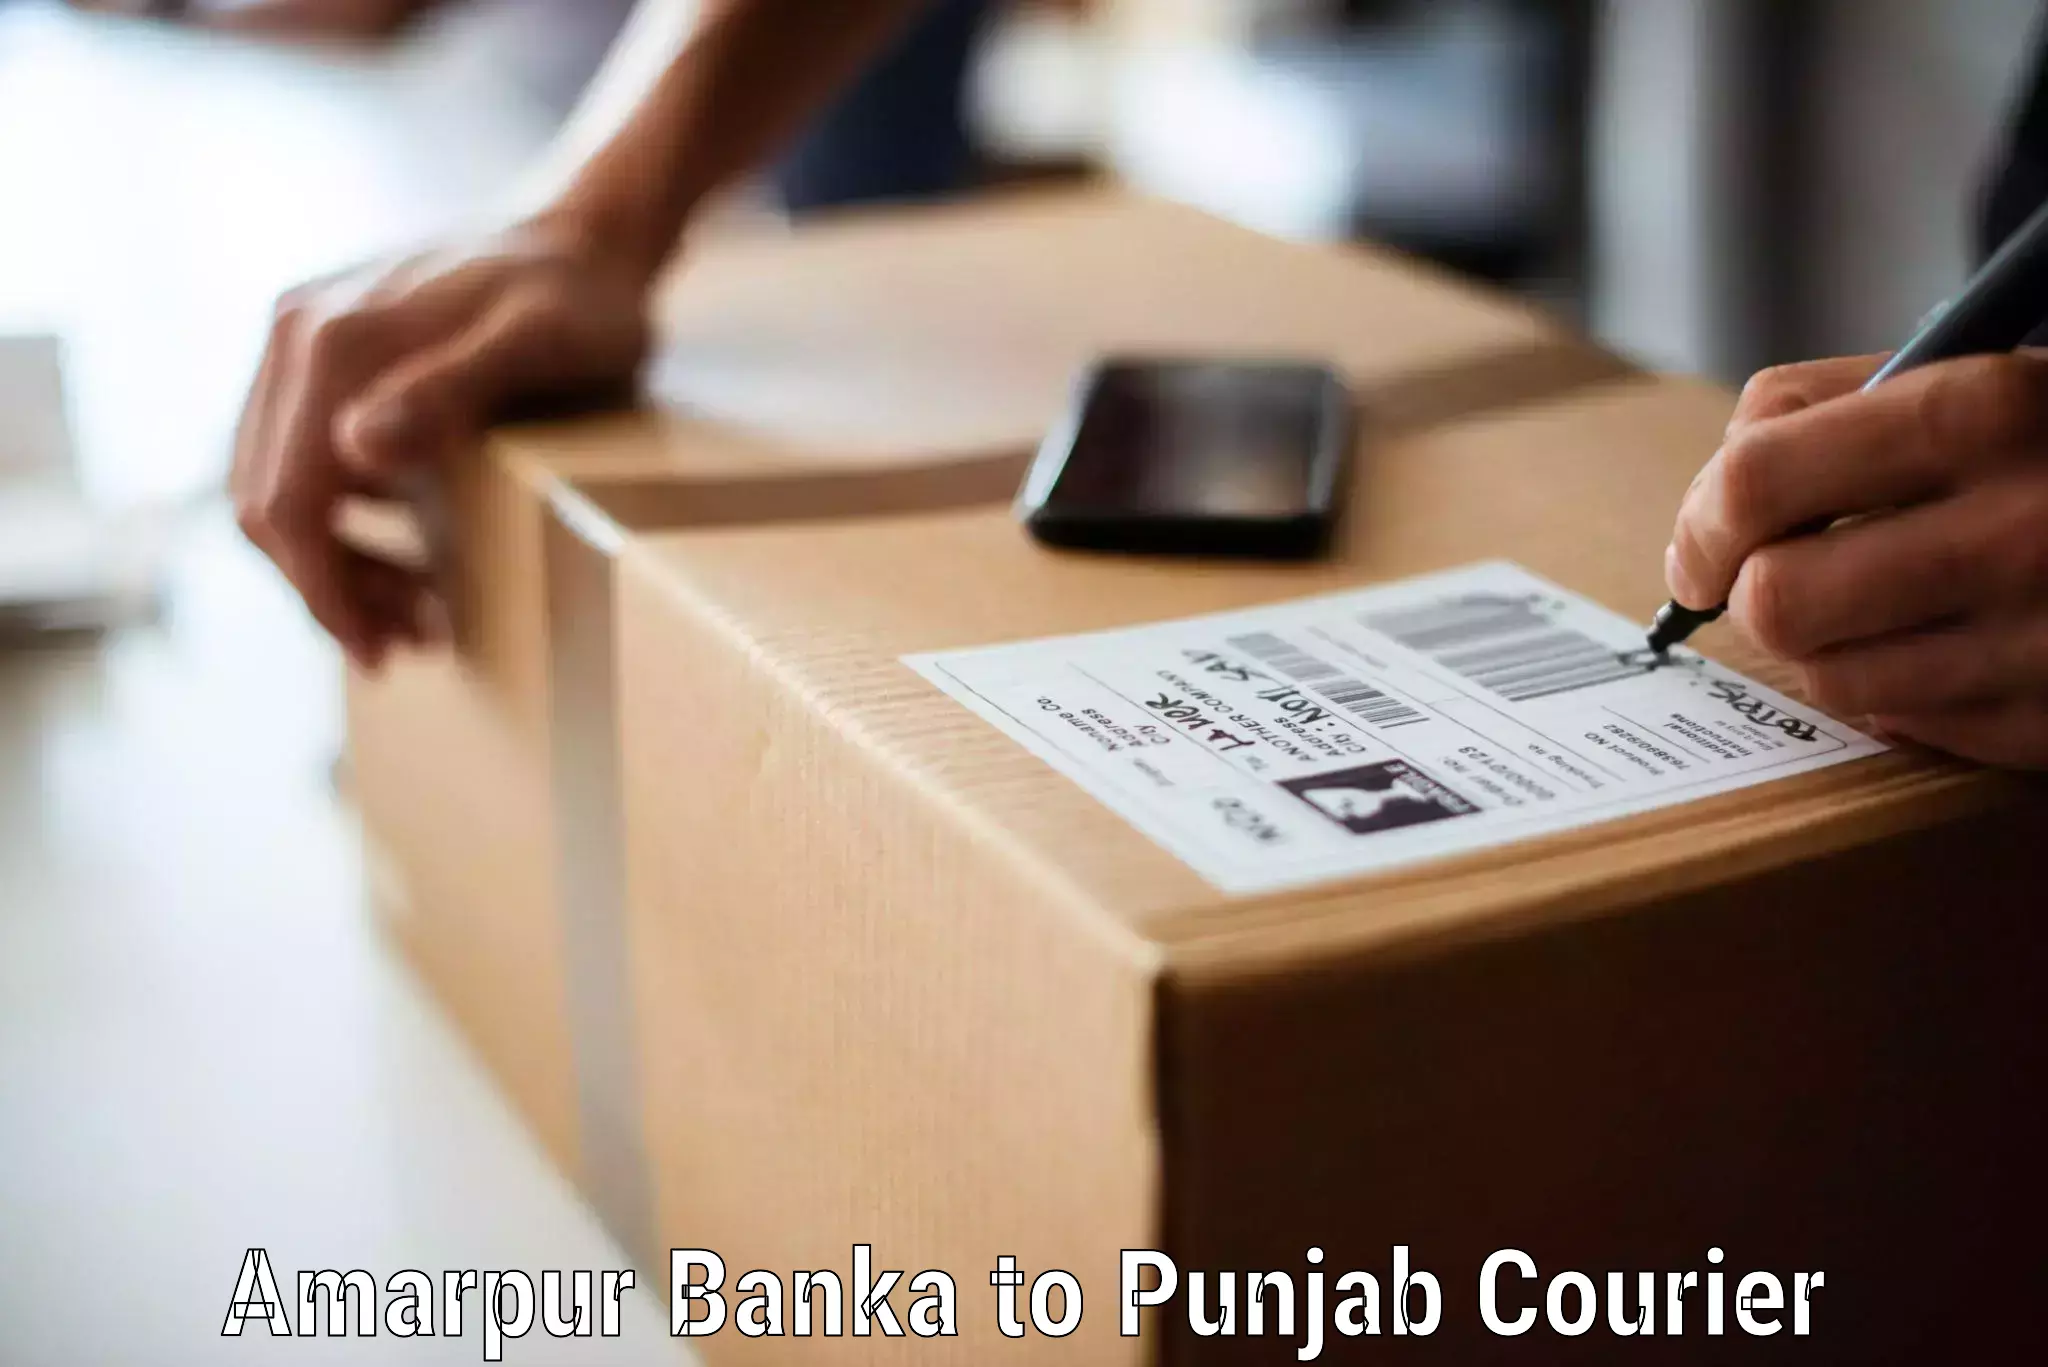 Reliable relocation services Amarpur Banka to Patiala